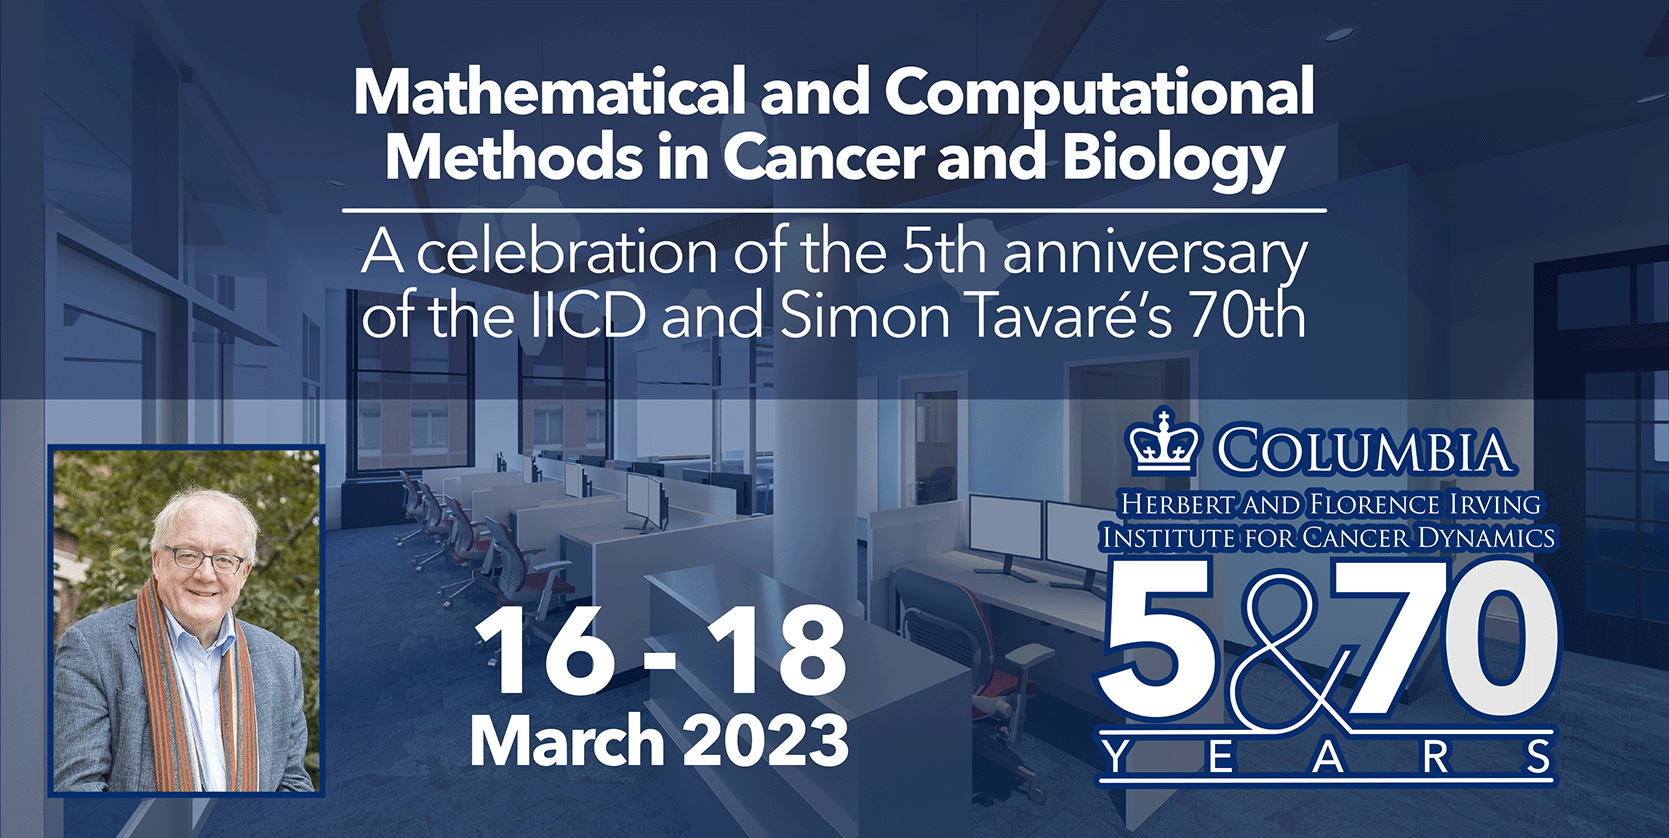 Headshot of Simon Tavare on a blue background displaying open space offices. Mathematical and computational methods in cancer and biology: a celebration of the 5th anniversary of the IICD and Simon Tavare's 70th written at the top. At the bottom is displayed the dates March 16-18, 2023 and the logo of IICD.  